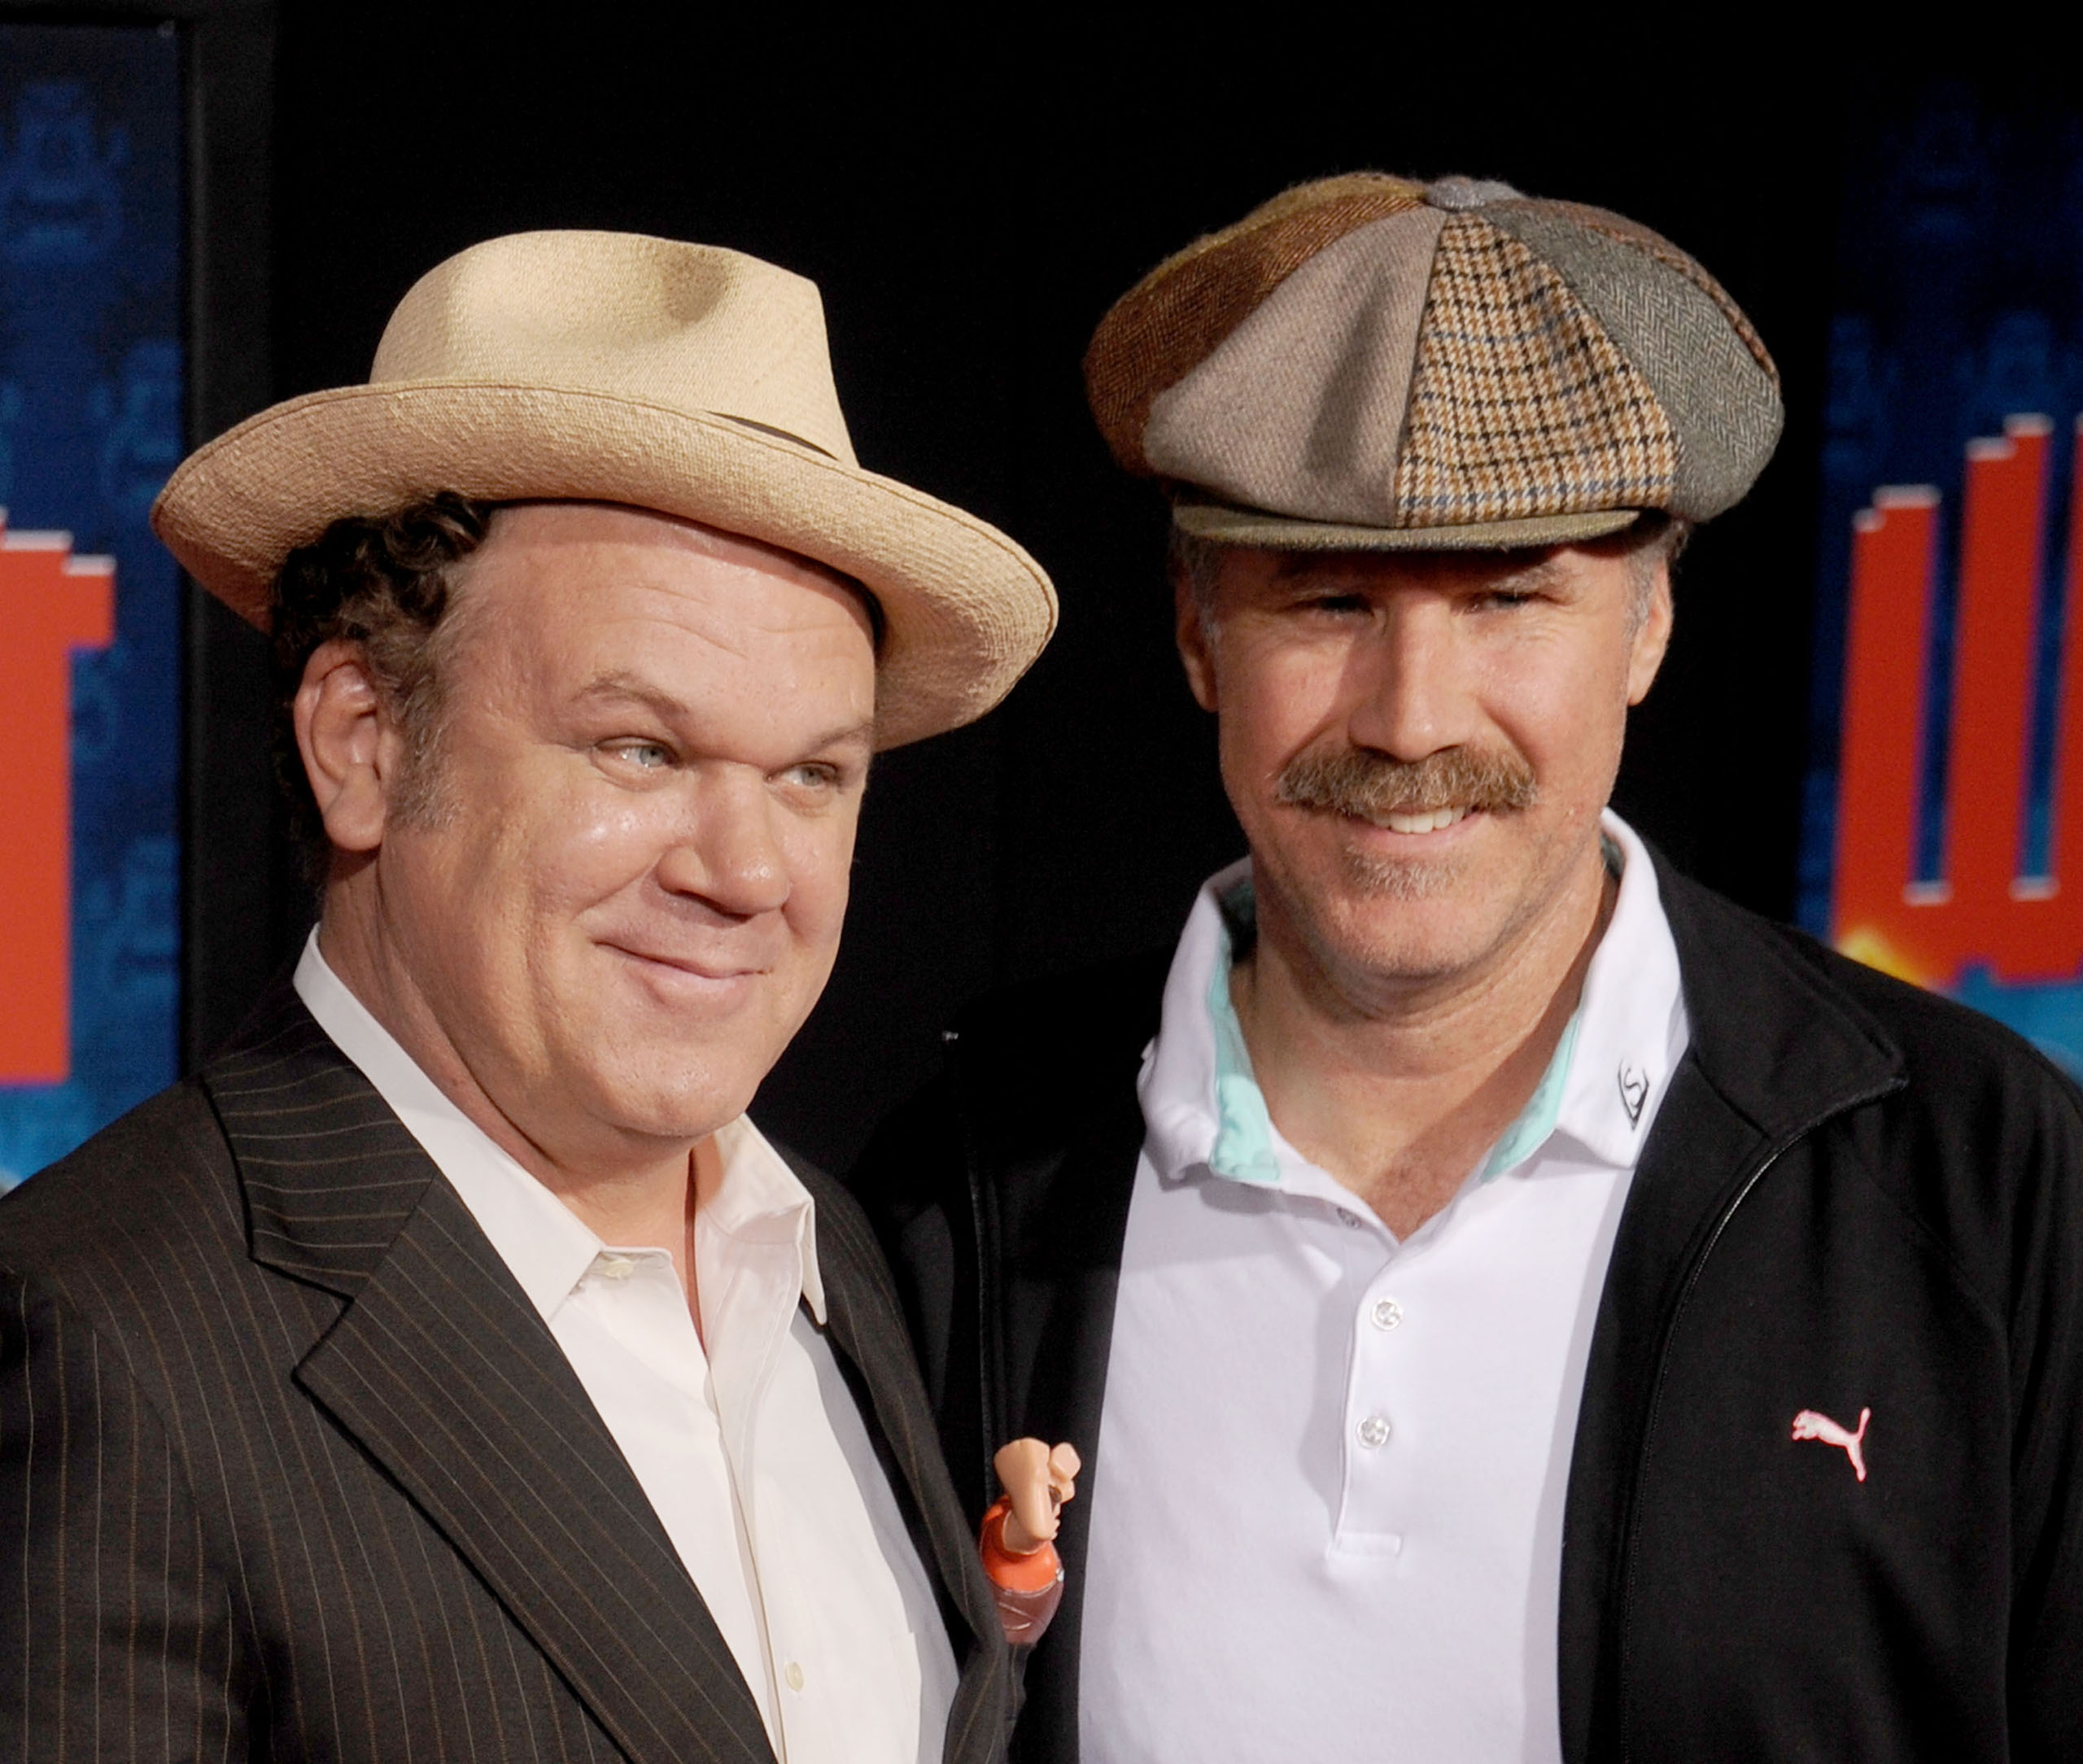 John C. Reilly and Will Ferrell arrive at the Los Angeles premiere of "Wreck-It Ralph" at the El Capitan Theatre in Hollywood, Calif., on Oct. 29, 2012. (Gregg DeGuire—WireImage/Getty Images)